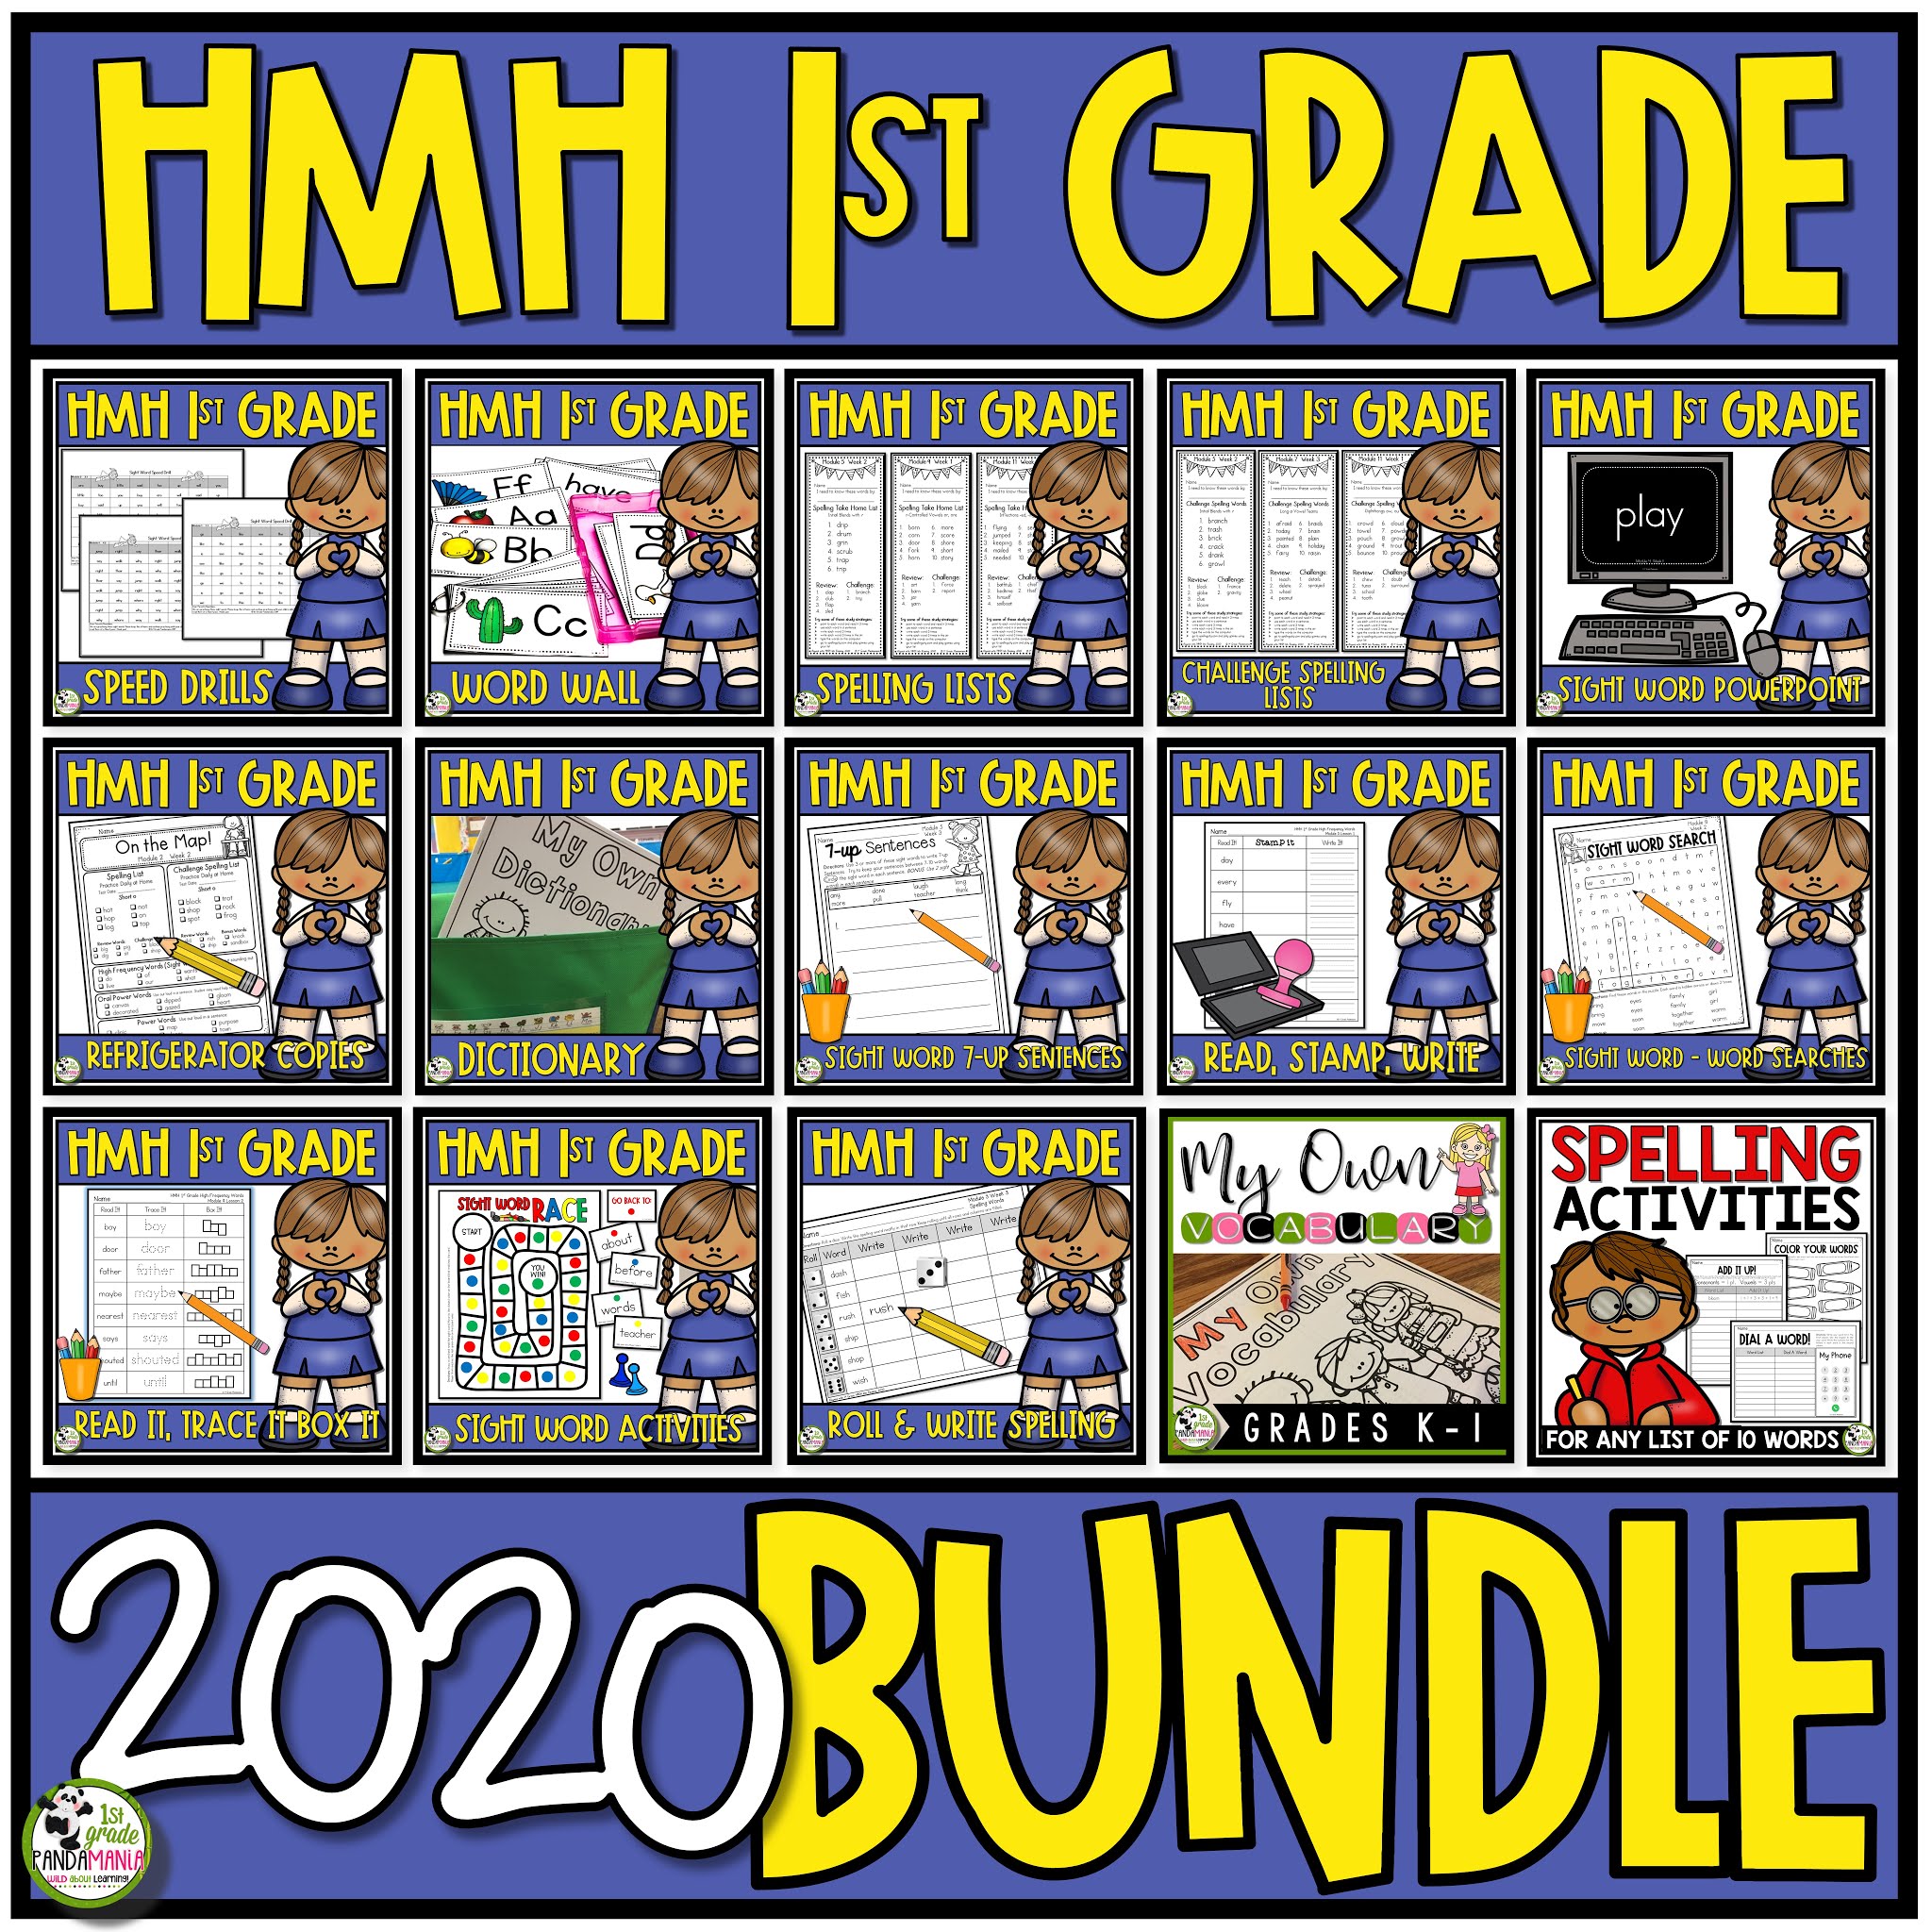 Easily Supplement Your HMH Into Reading Curriculum for K-2nd! 2